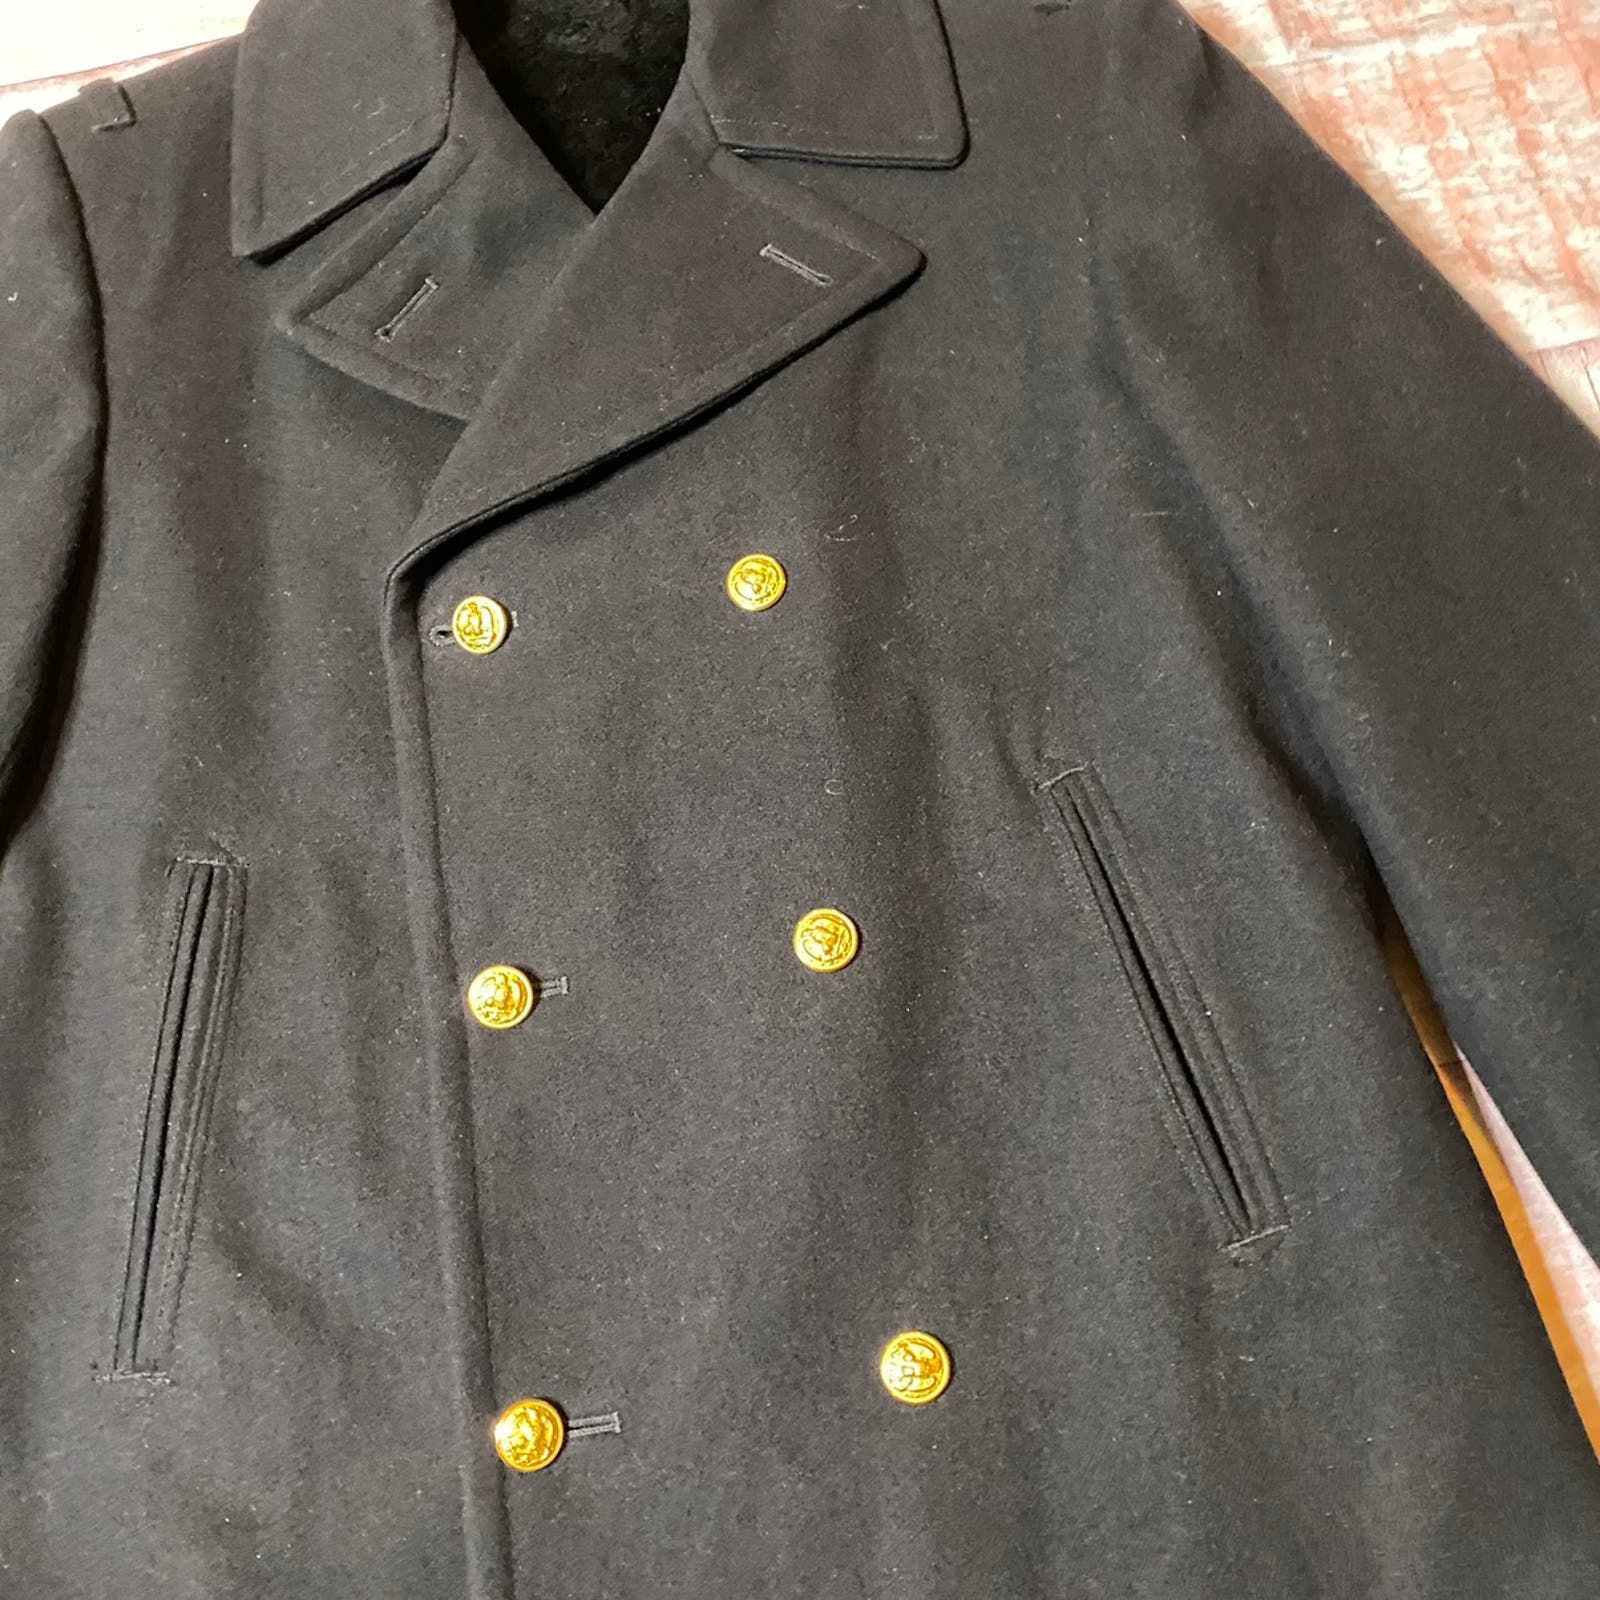 Other Neptune Garment Co Black Wool Military Pea Coat Size Small Size US S / EU 44-46 / 1 - 4 Thumbnail